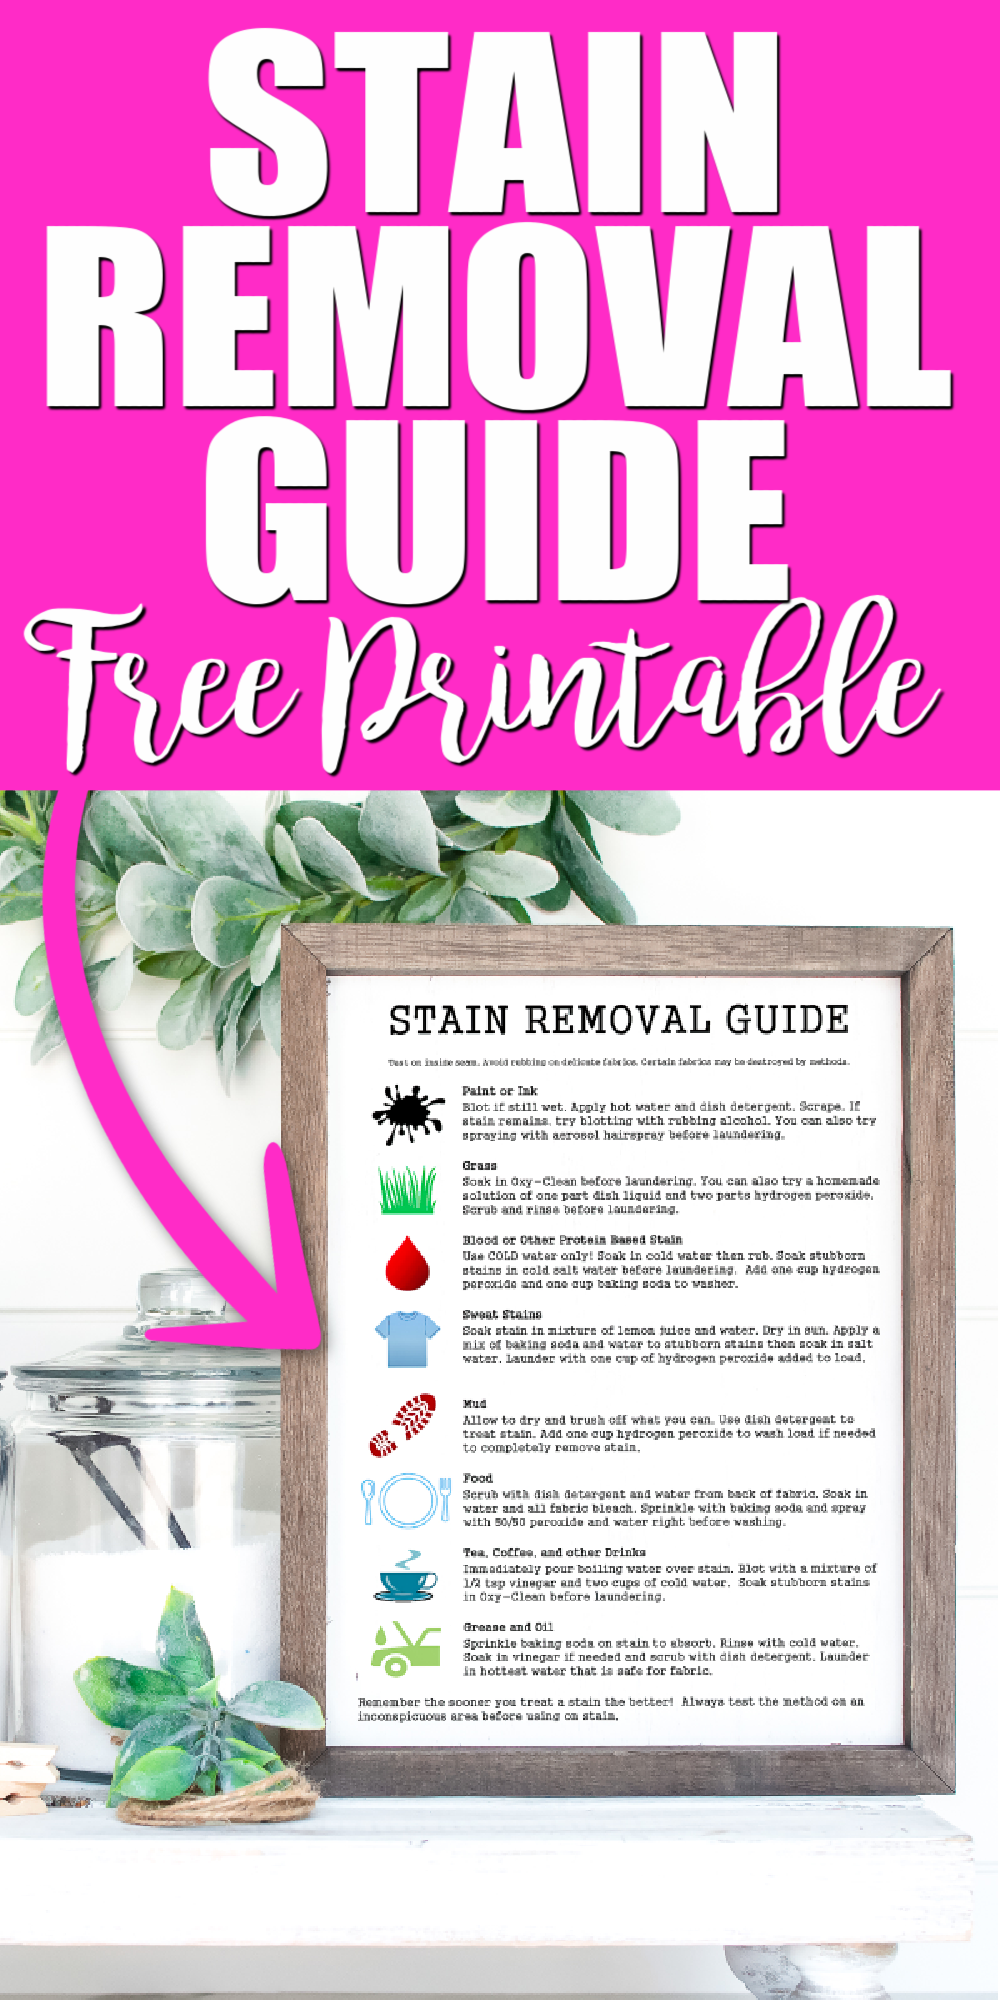 Stain Removal Guide: Get Grass, Blood, Oil, Grease and Other Stains Out of  Clothing - CNET